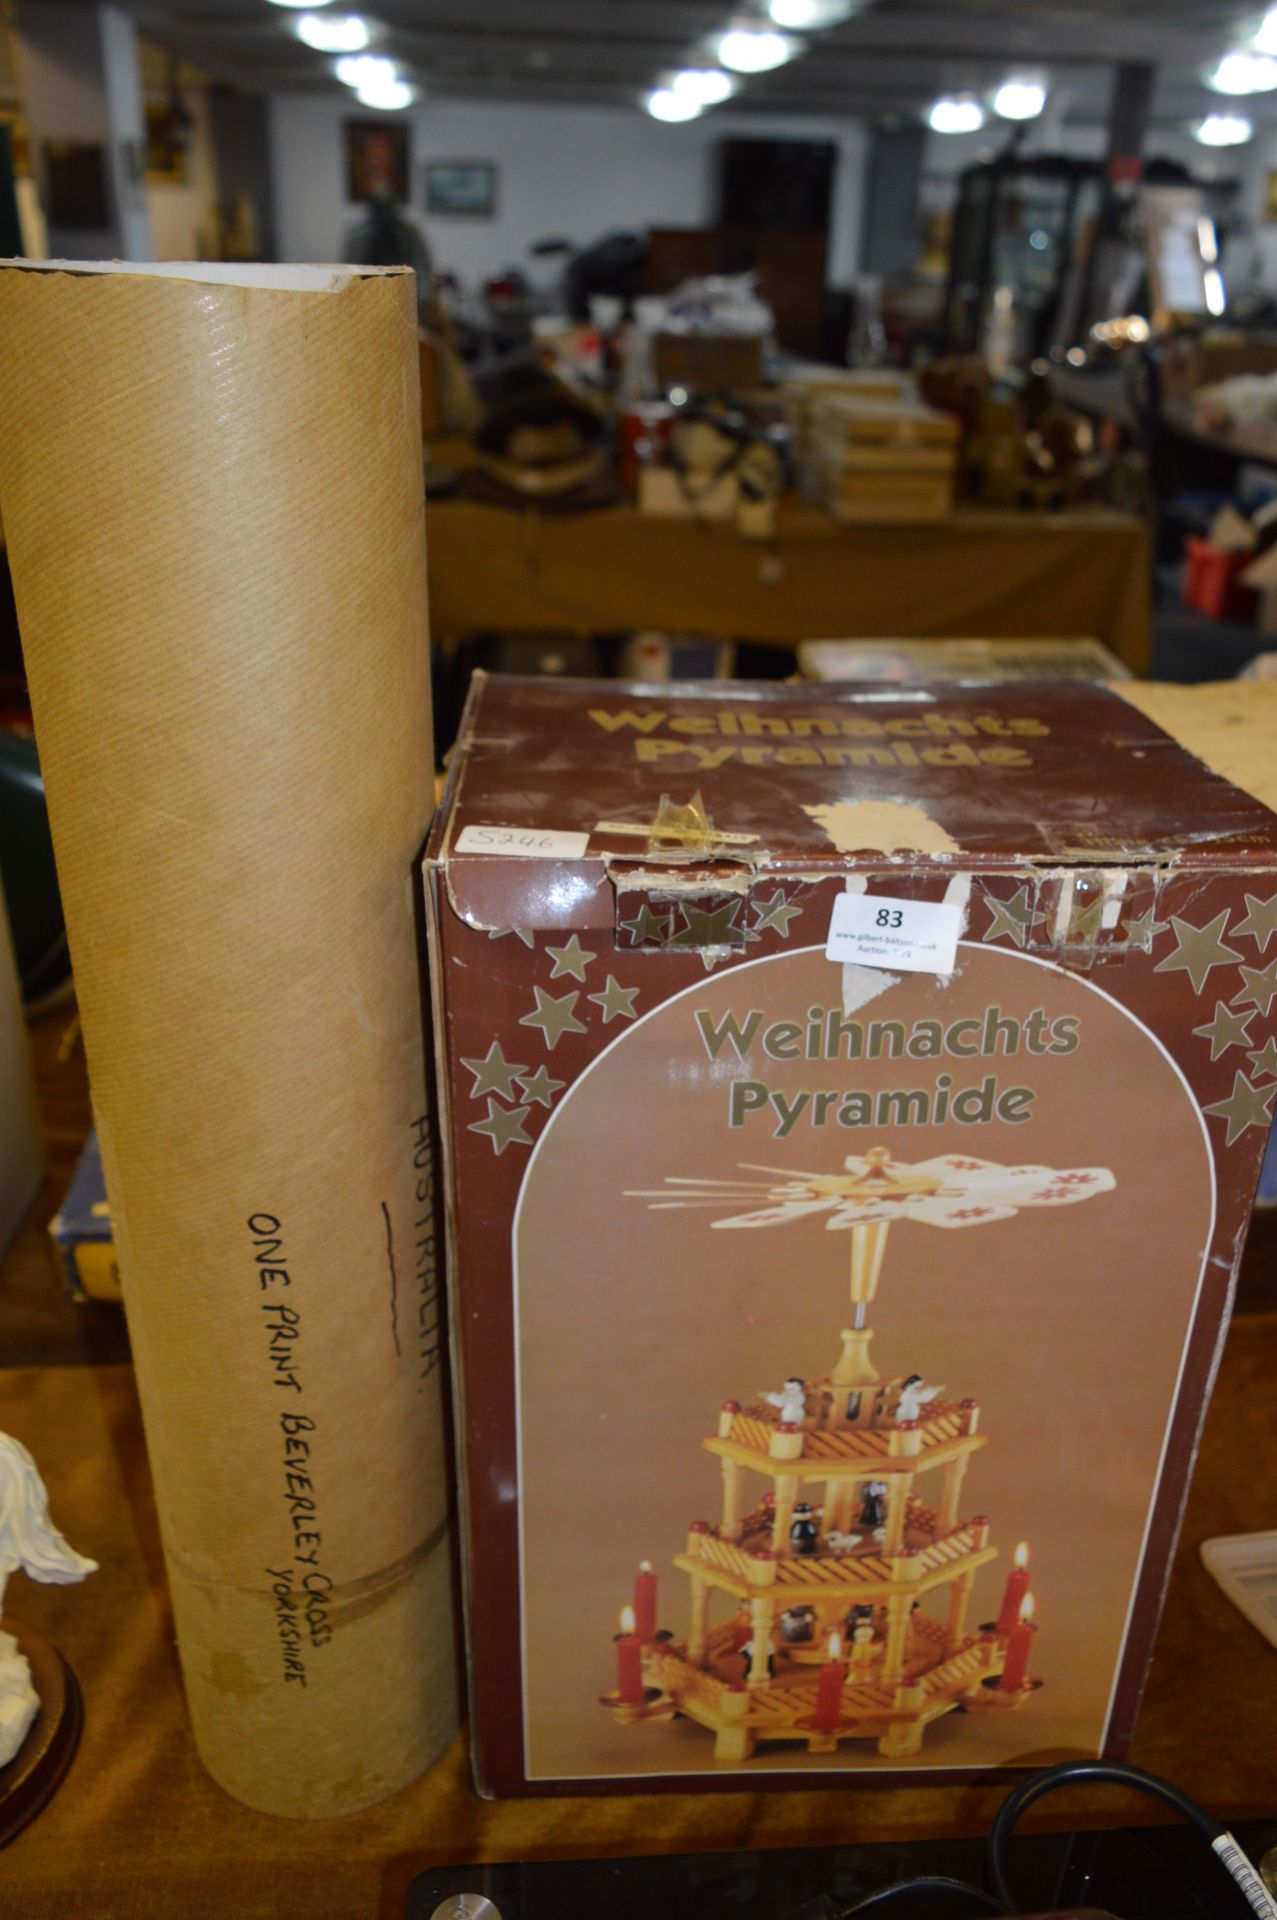 Weihnachts Pyramid Ornament and a Print of Beverle